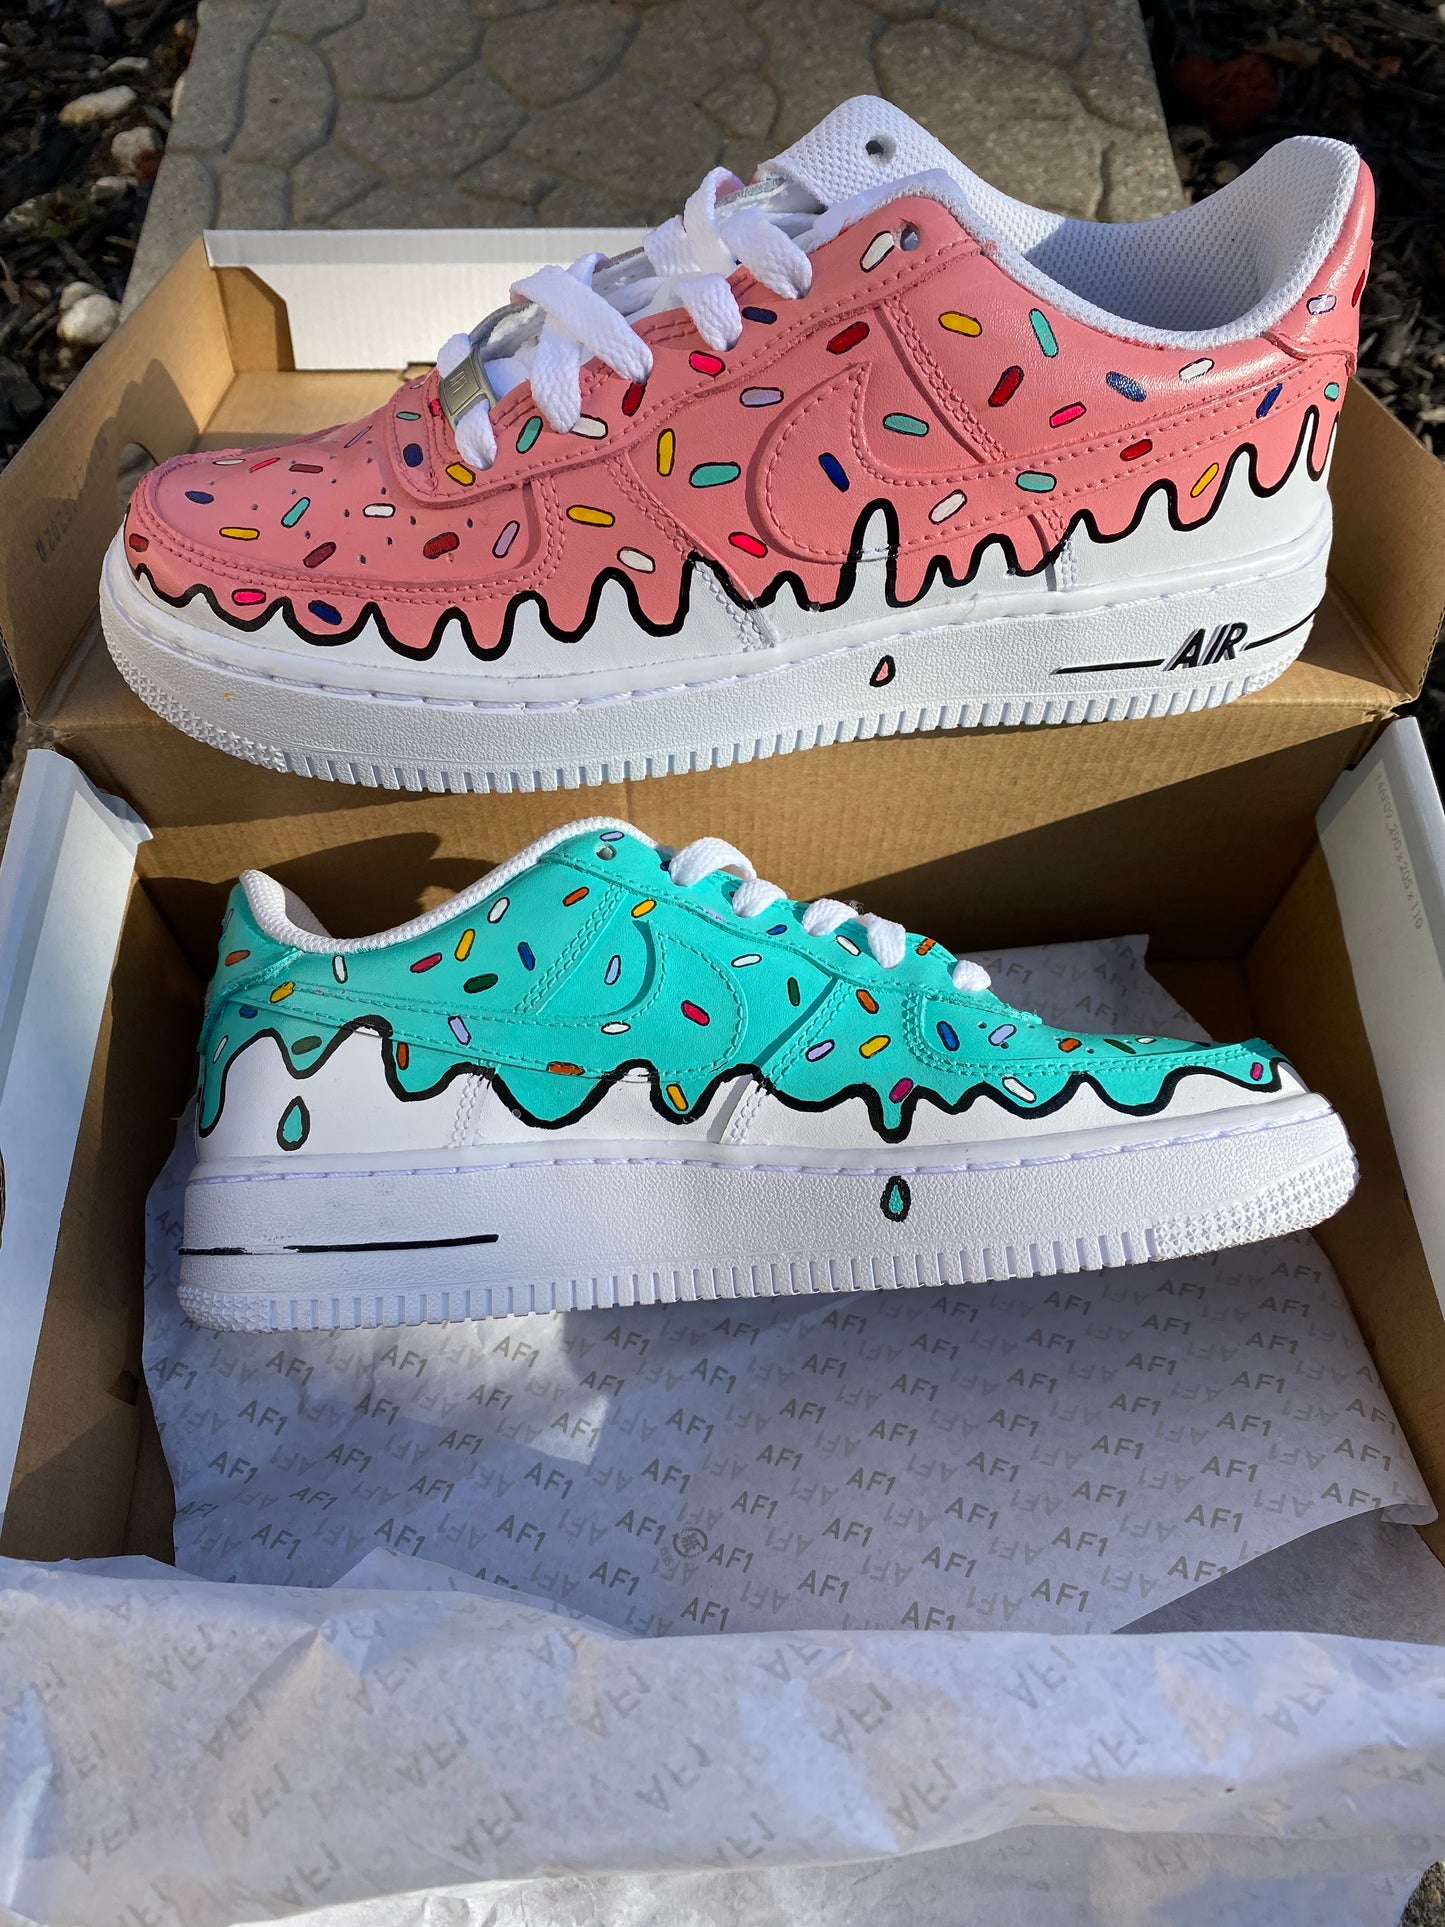 Donut Sprinkle Drip Air Force 1 - SOLD OUT!